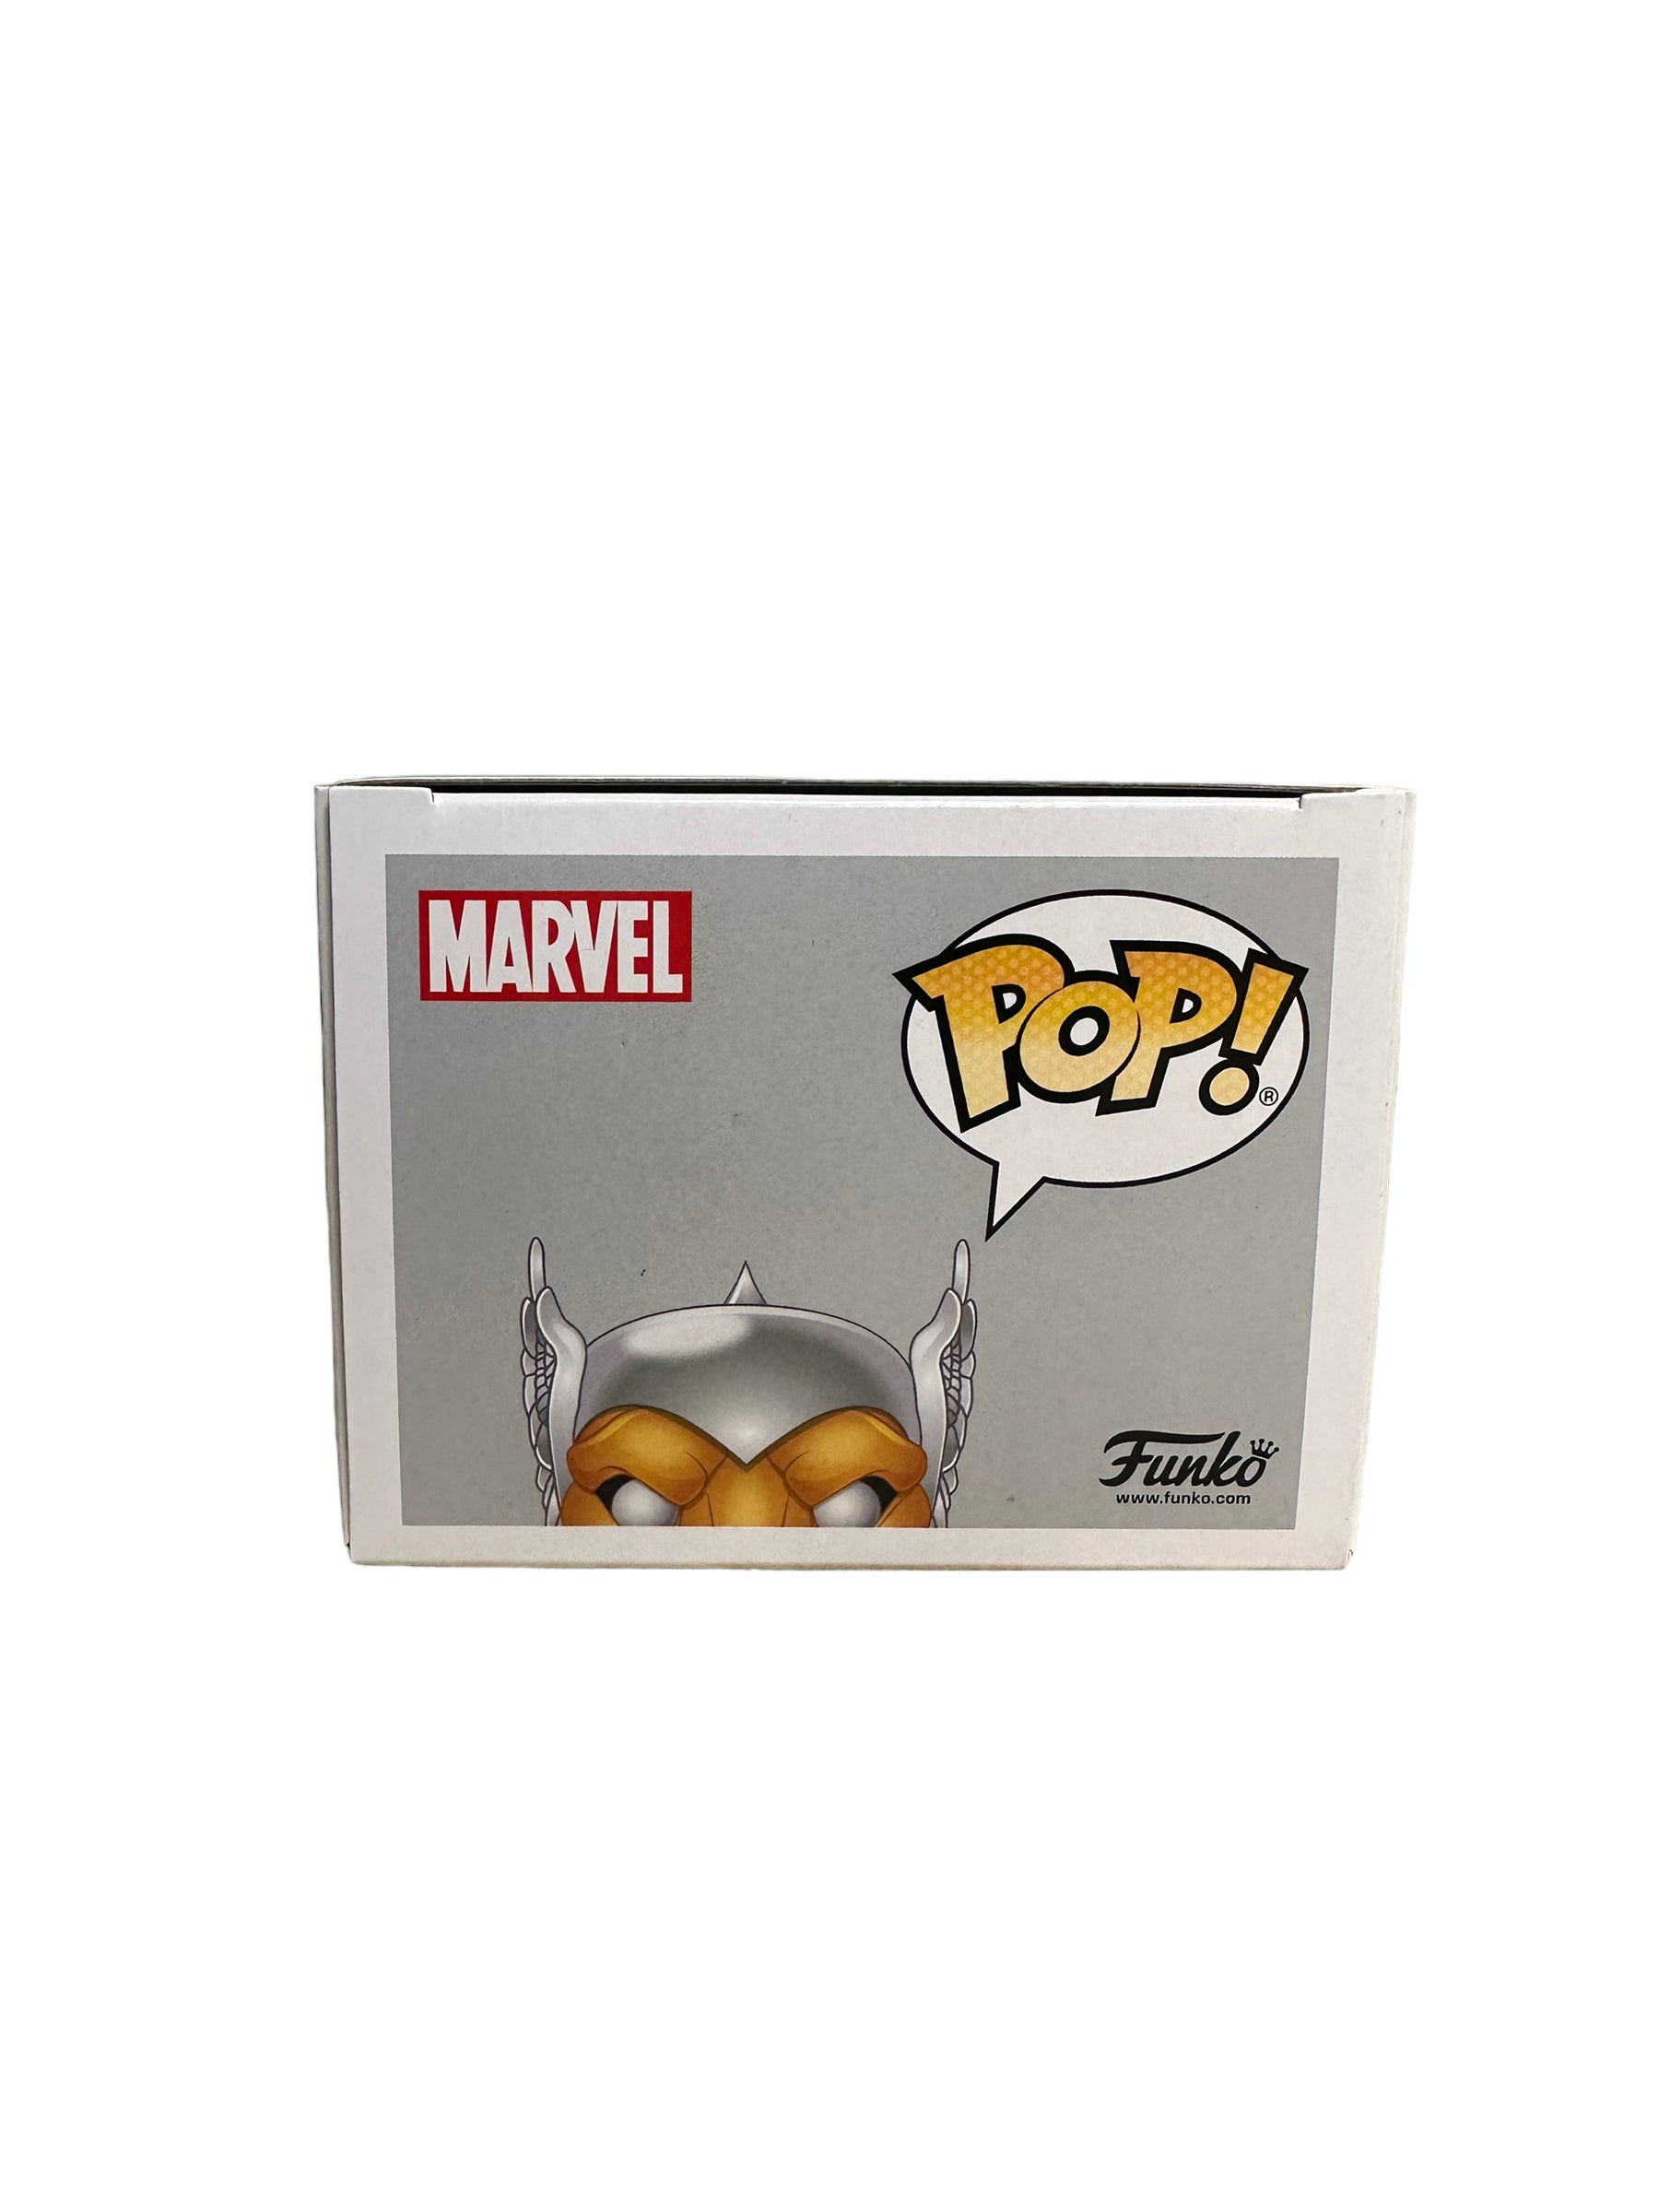 Beta Ray Bill #582 Funko Pop! - Marvel 80 Years - Special Edition - Condition 9.5/10